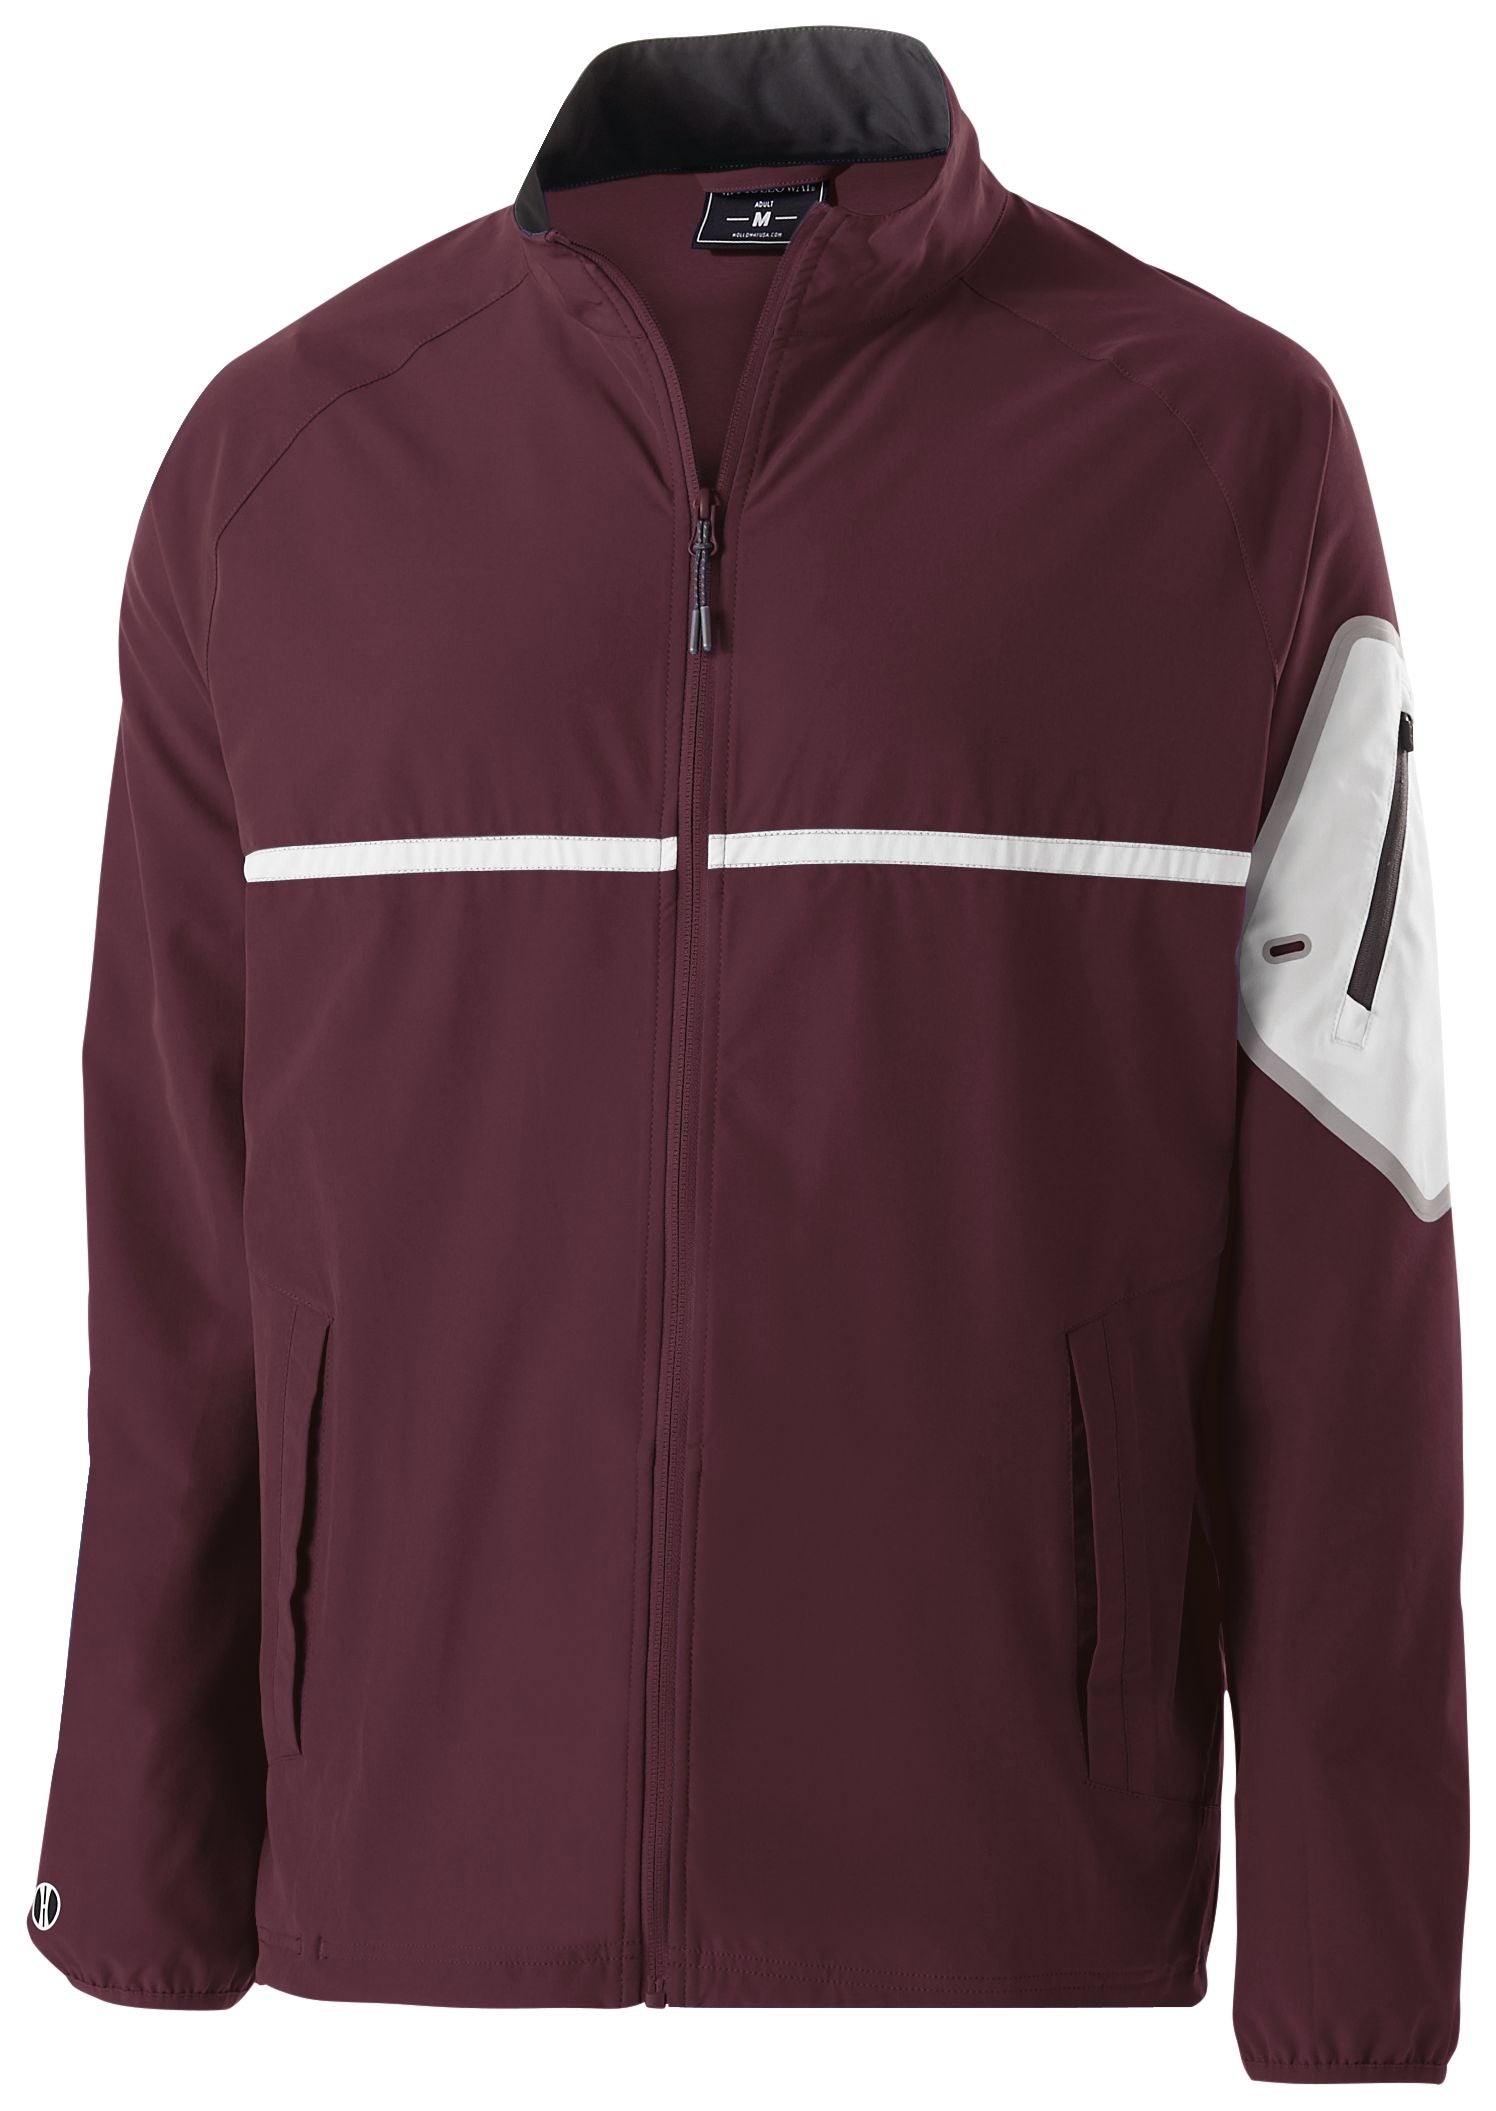 Holloway Weld Jacket in Maroon/White  -Part of the Adult, Adult-Jacket, Holloway, Outerwear, Weld-Collection product lines at KanaleyCreations.com